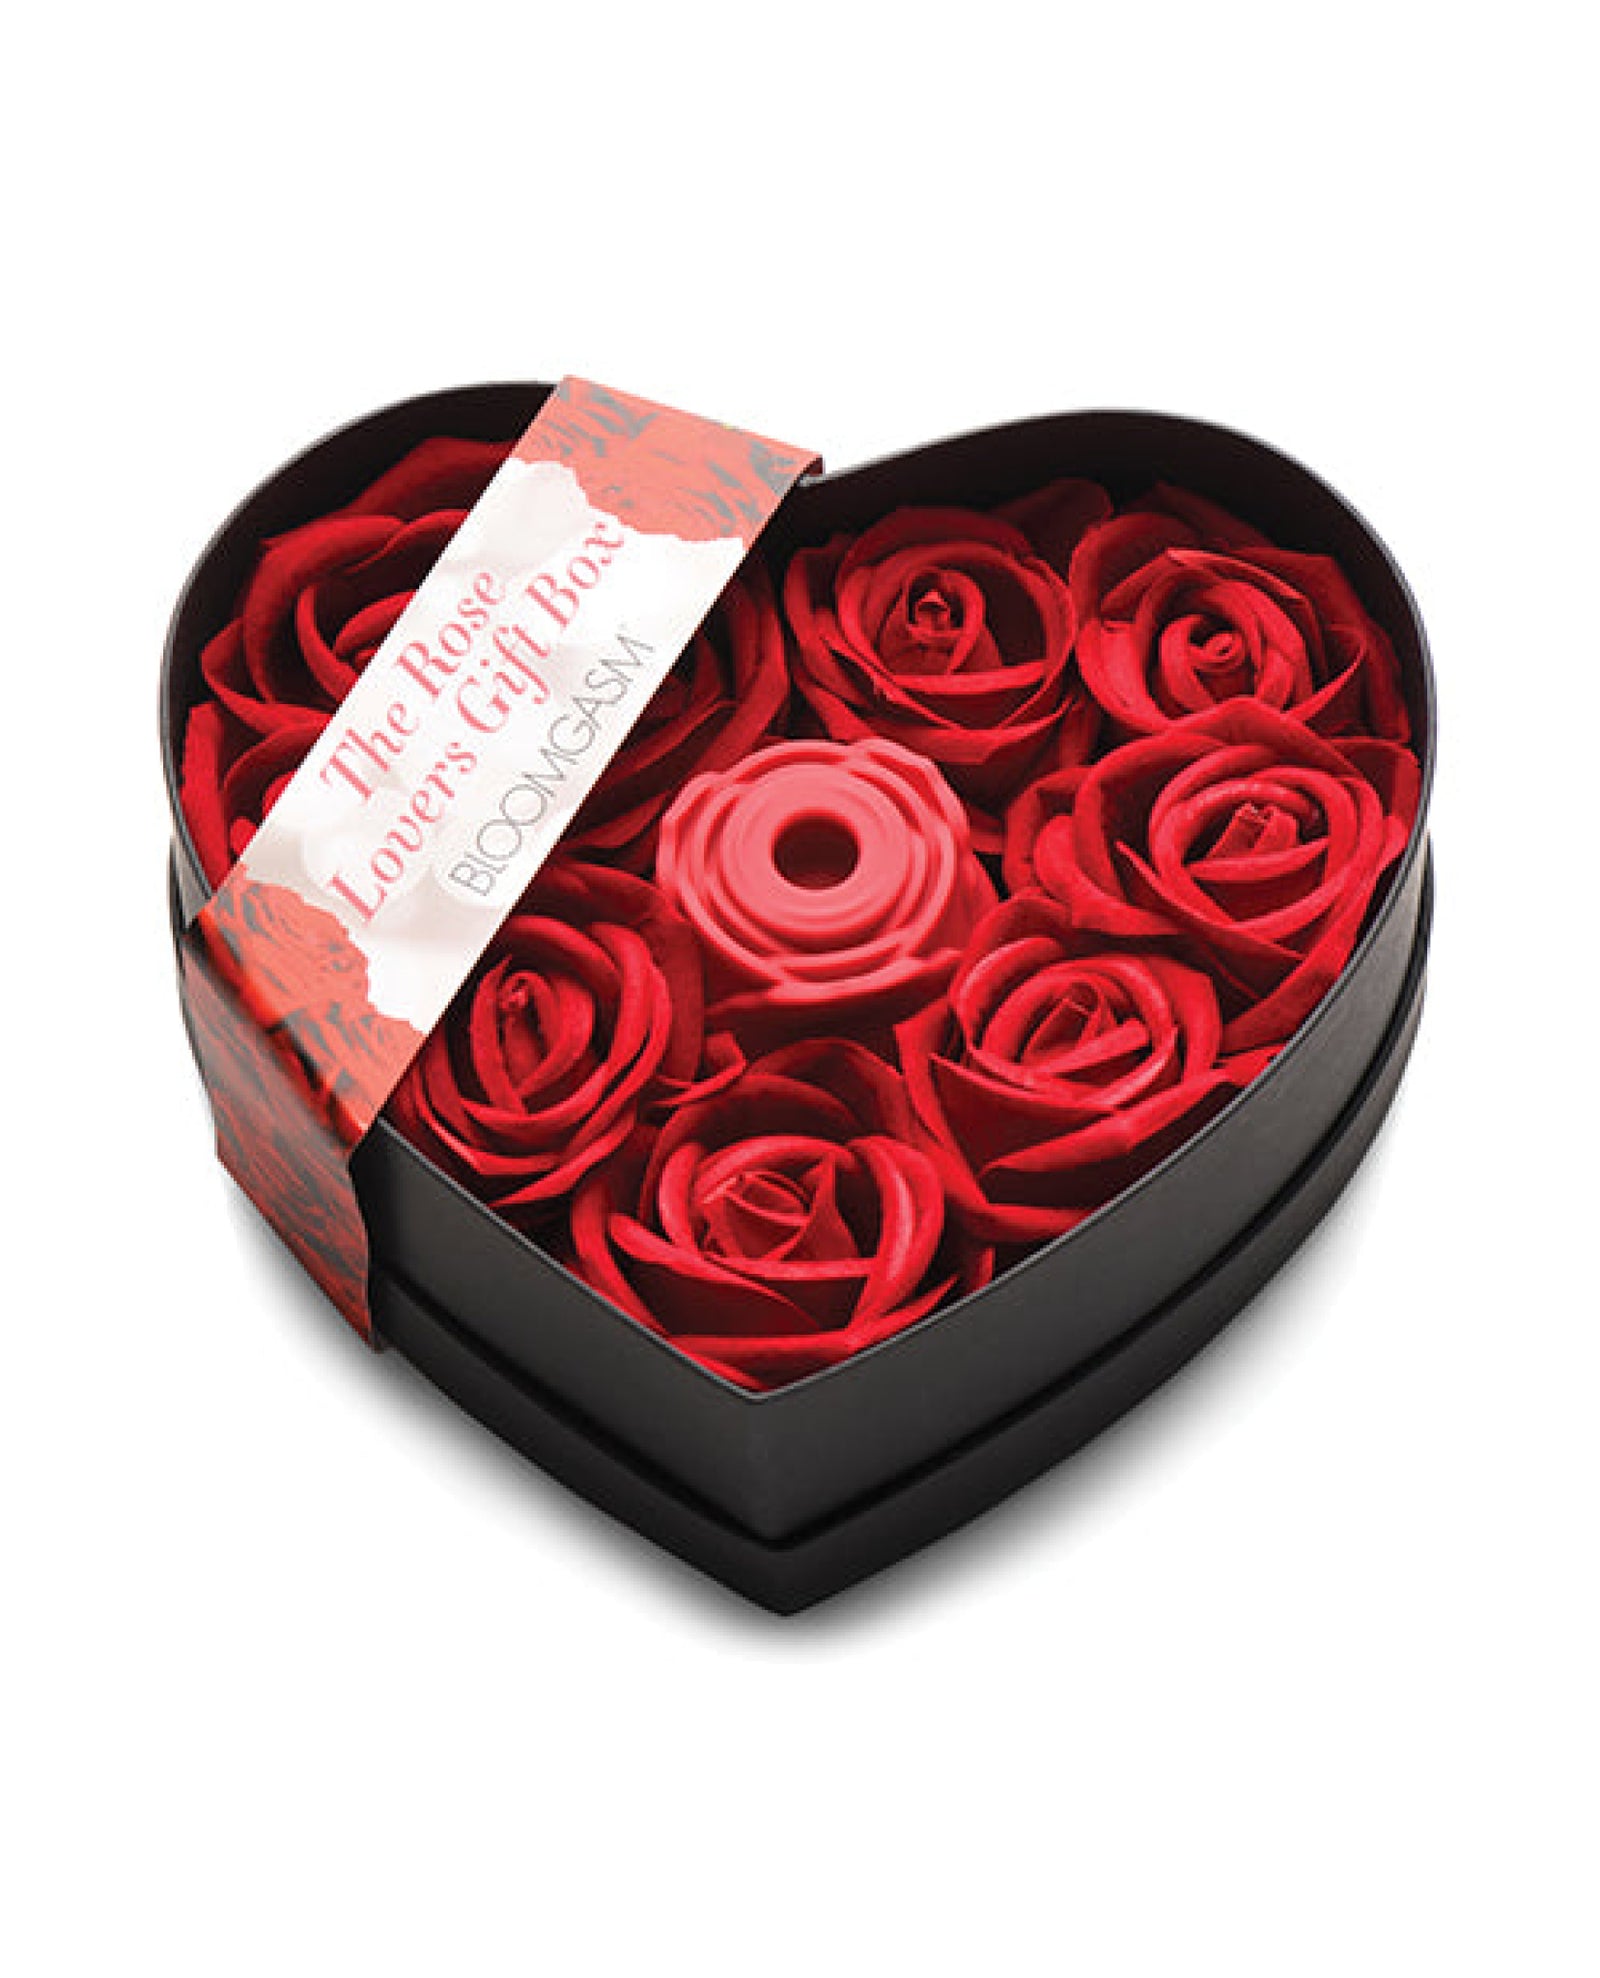 Inmi Bloomgasm The Rose Lovers Gift Box Inmi